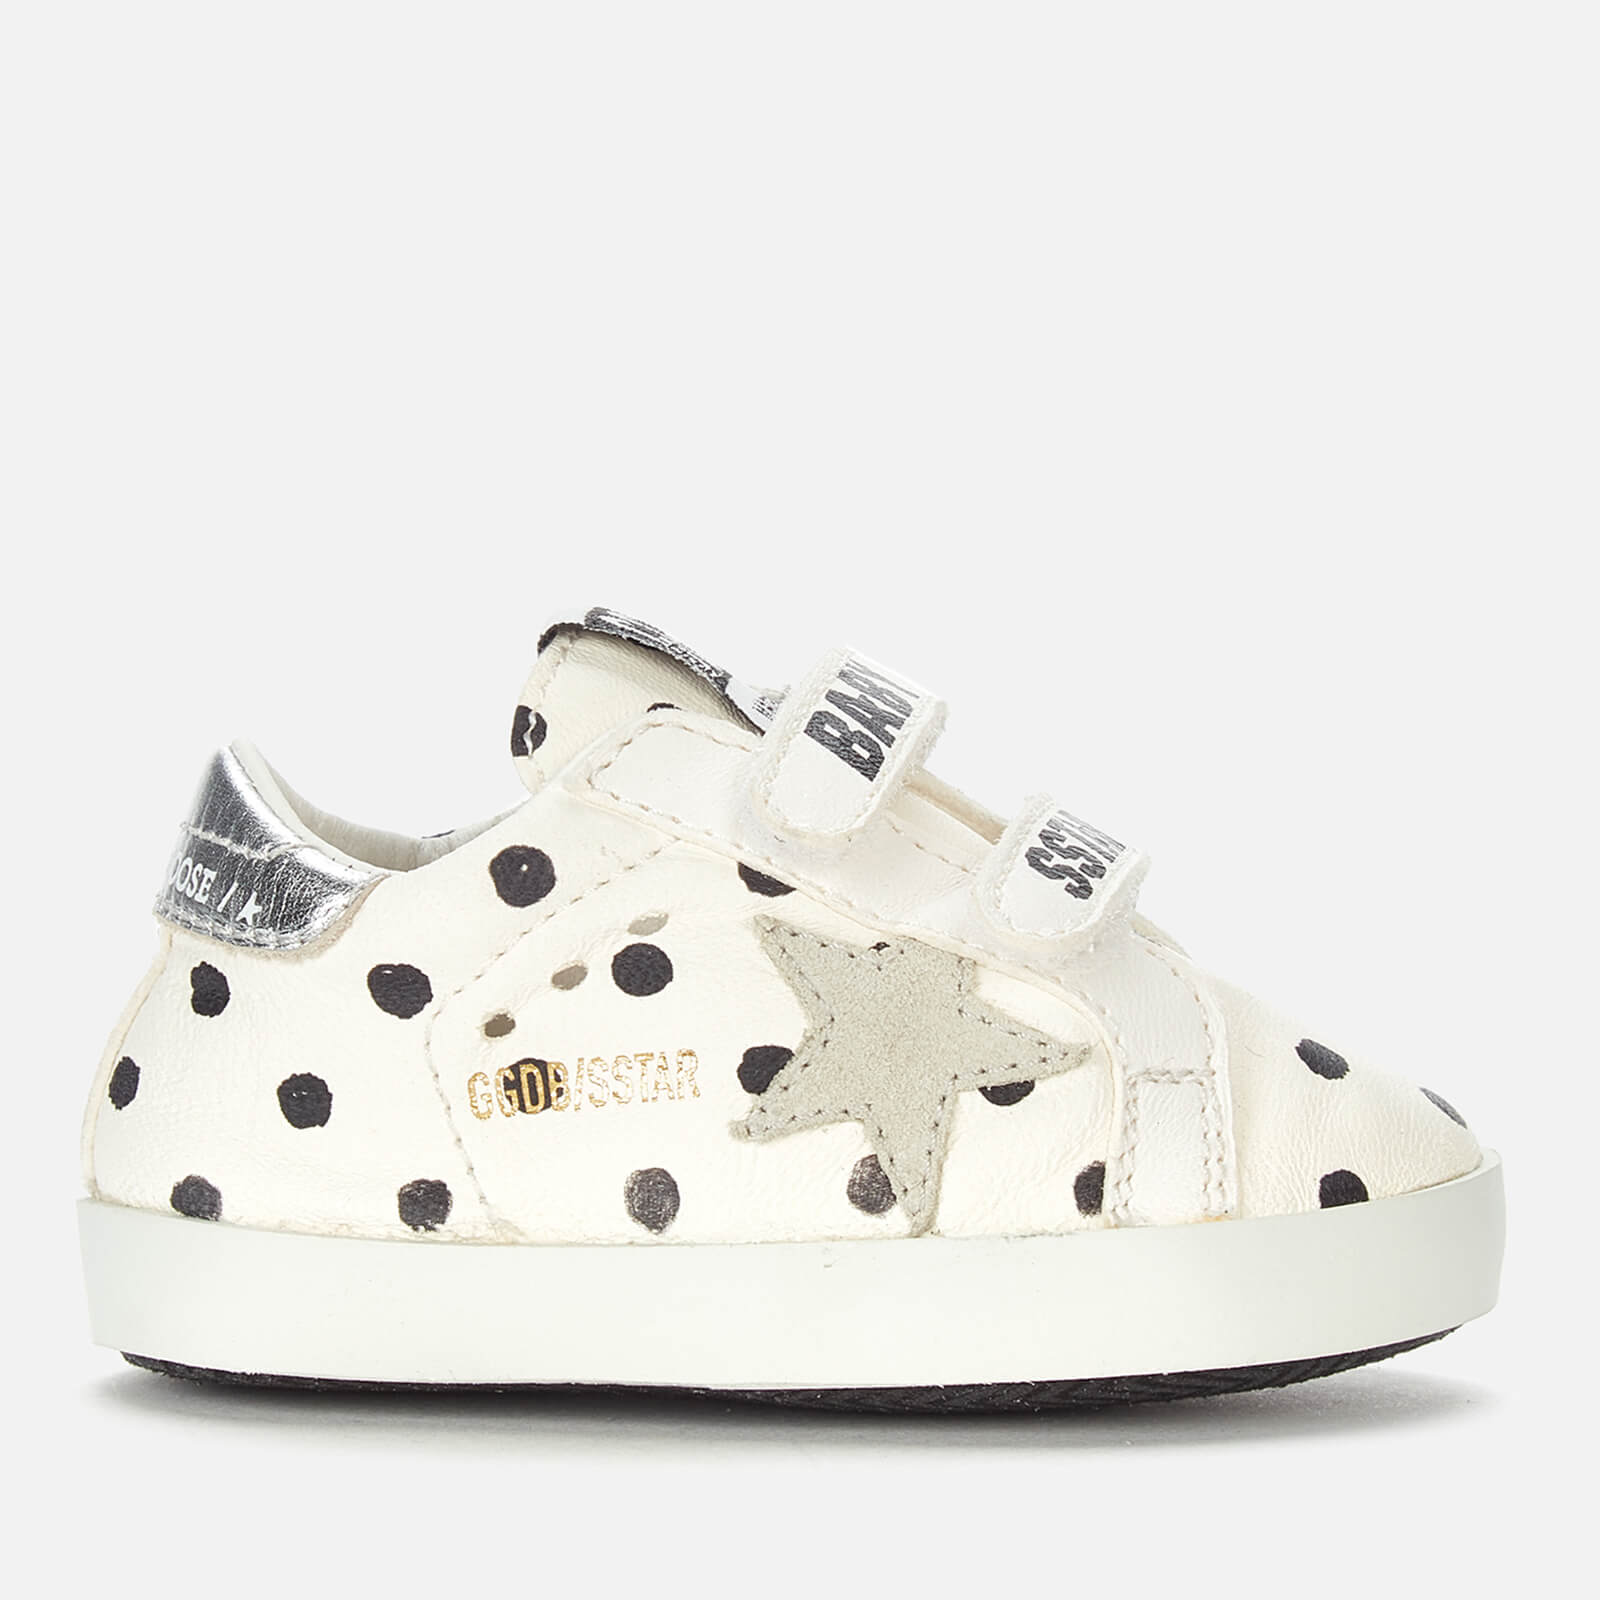 Golden Goose Deluxe Brand Babies' School Pois Print Trainers - White/Black Pois/Ice/Silver - UK 2 Infant